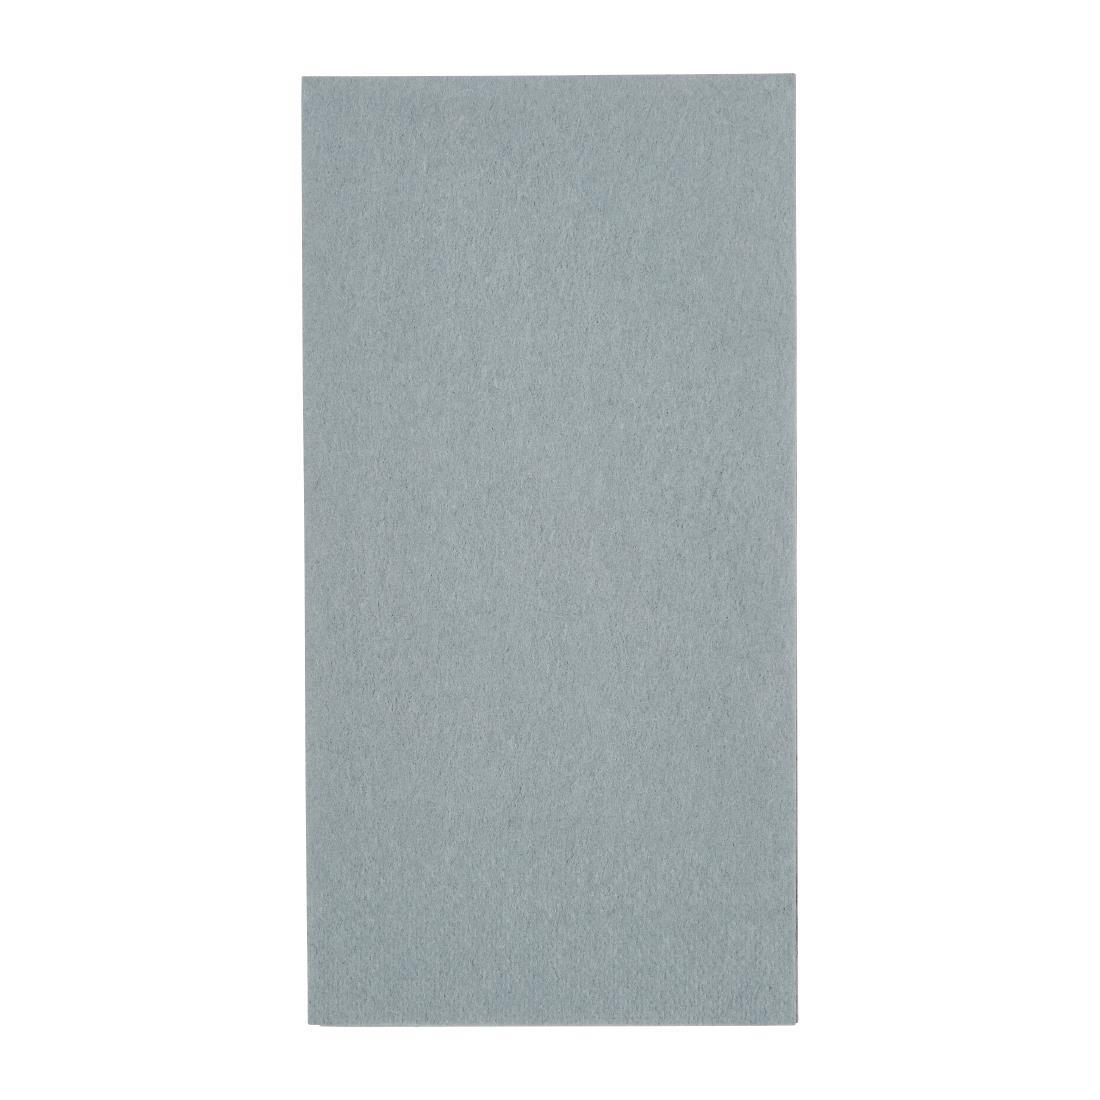 Fiesta Recyclable Dinner Napkin Grey 40x40cm 2ply 1/8 Fold (Pack of 2000) - FE247  - 1